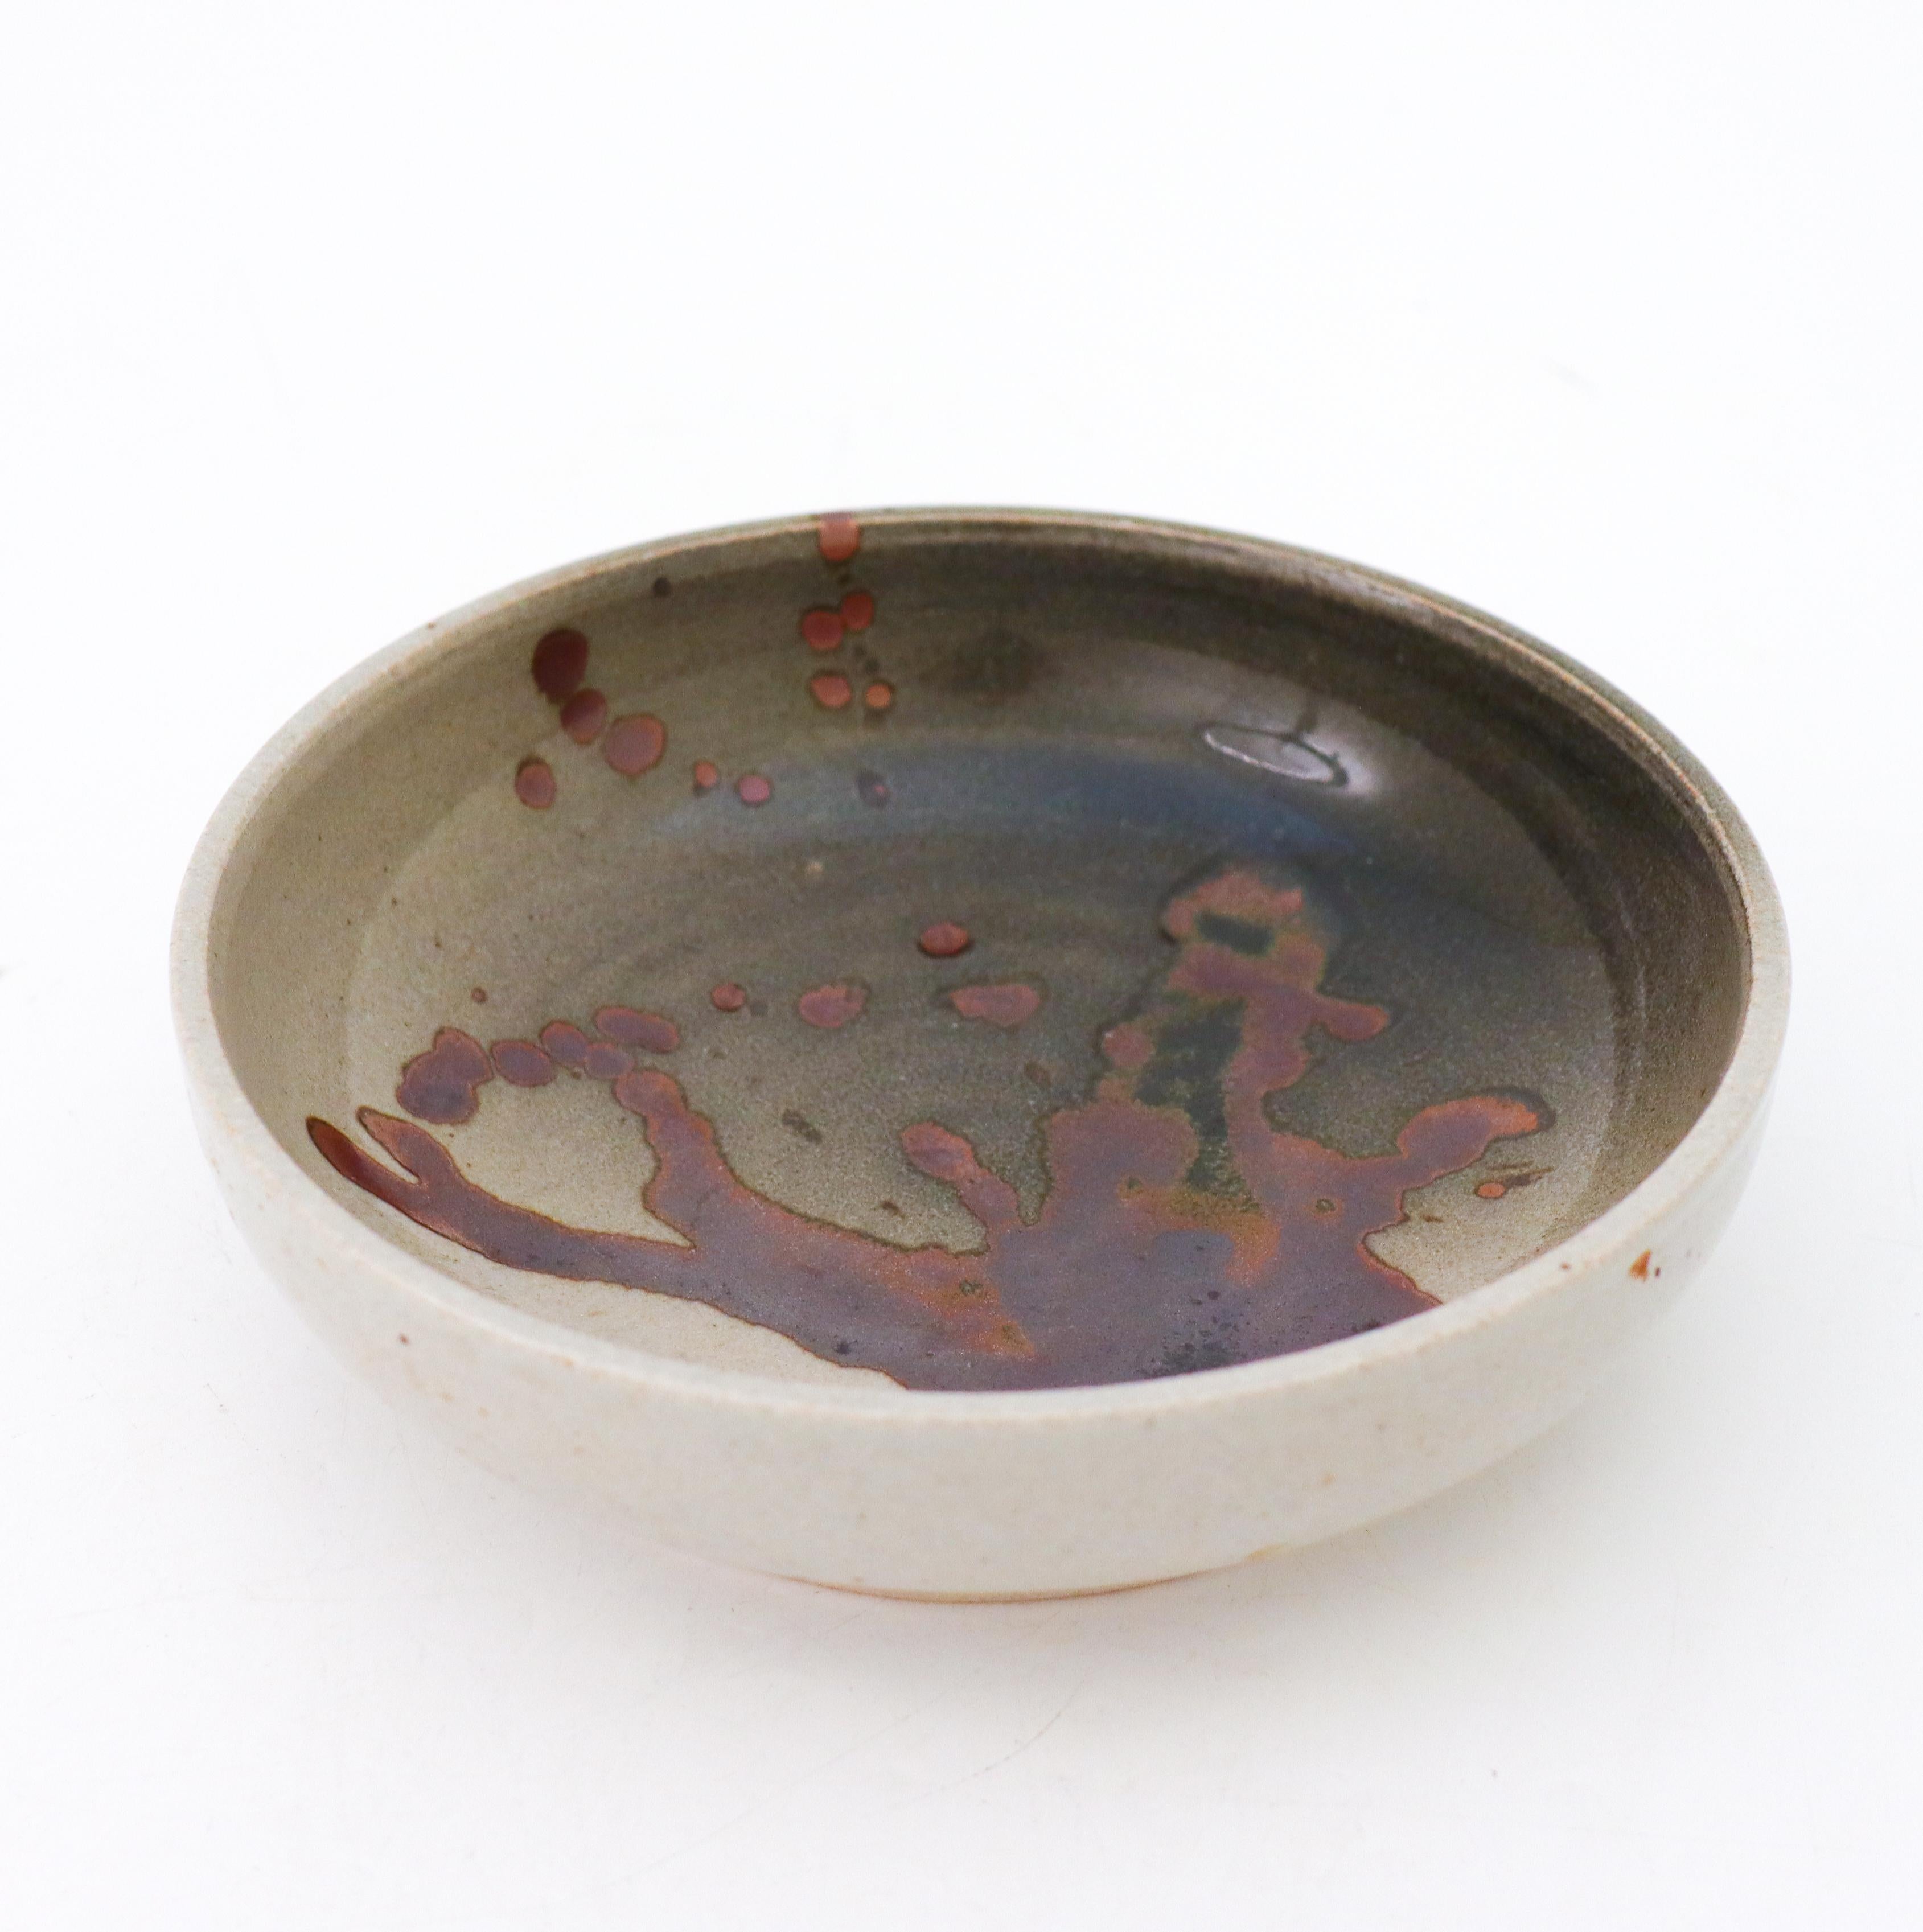 A beautiful bowl designed by the Swedish ceramicist Claes Thell in his workshop in Höganäs, Sweden in the late 20th century. The bowl is 18 cm (7.2